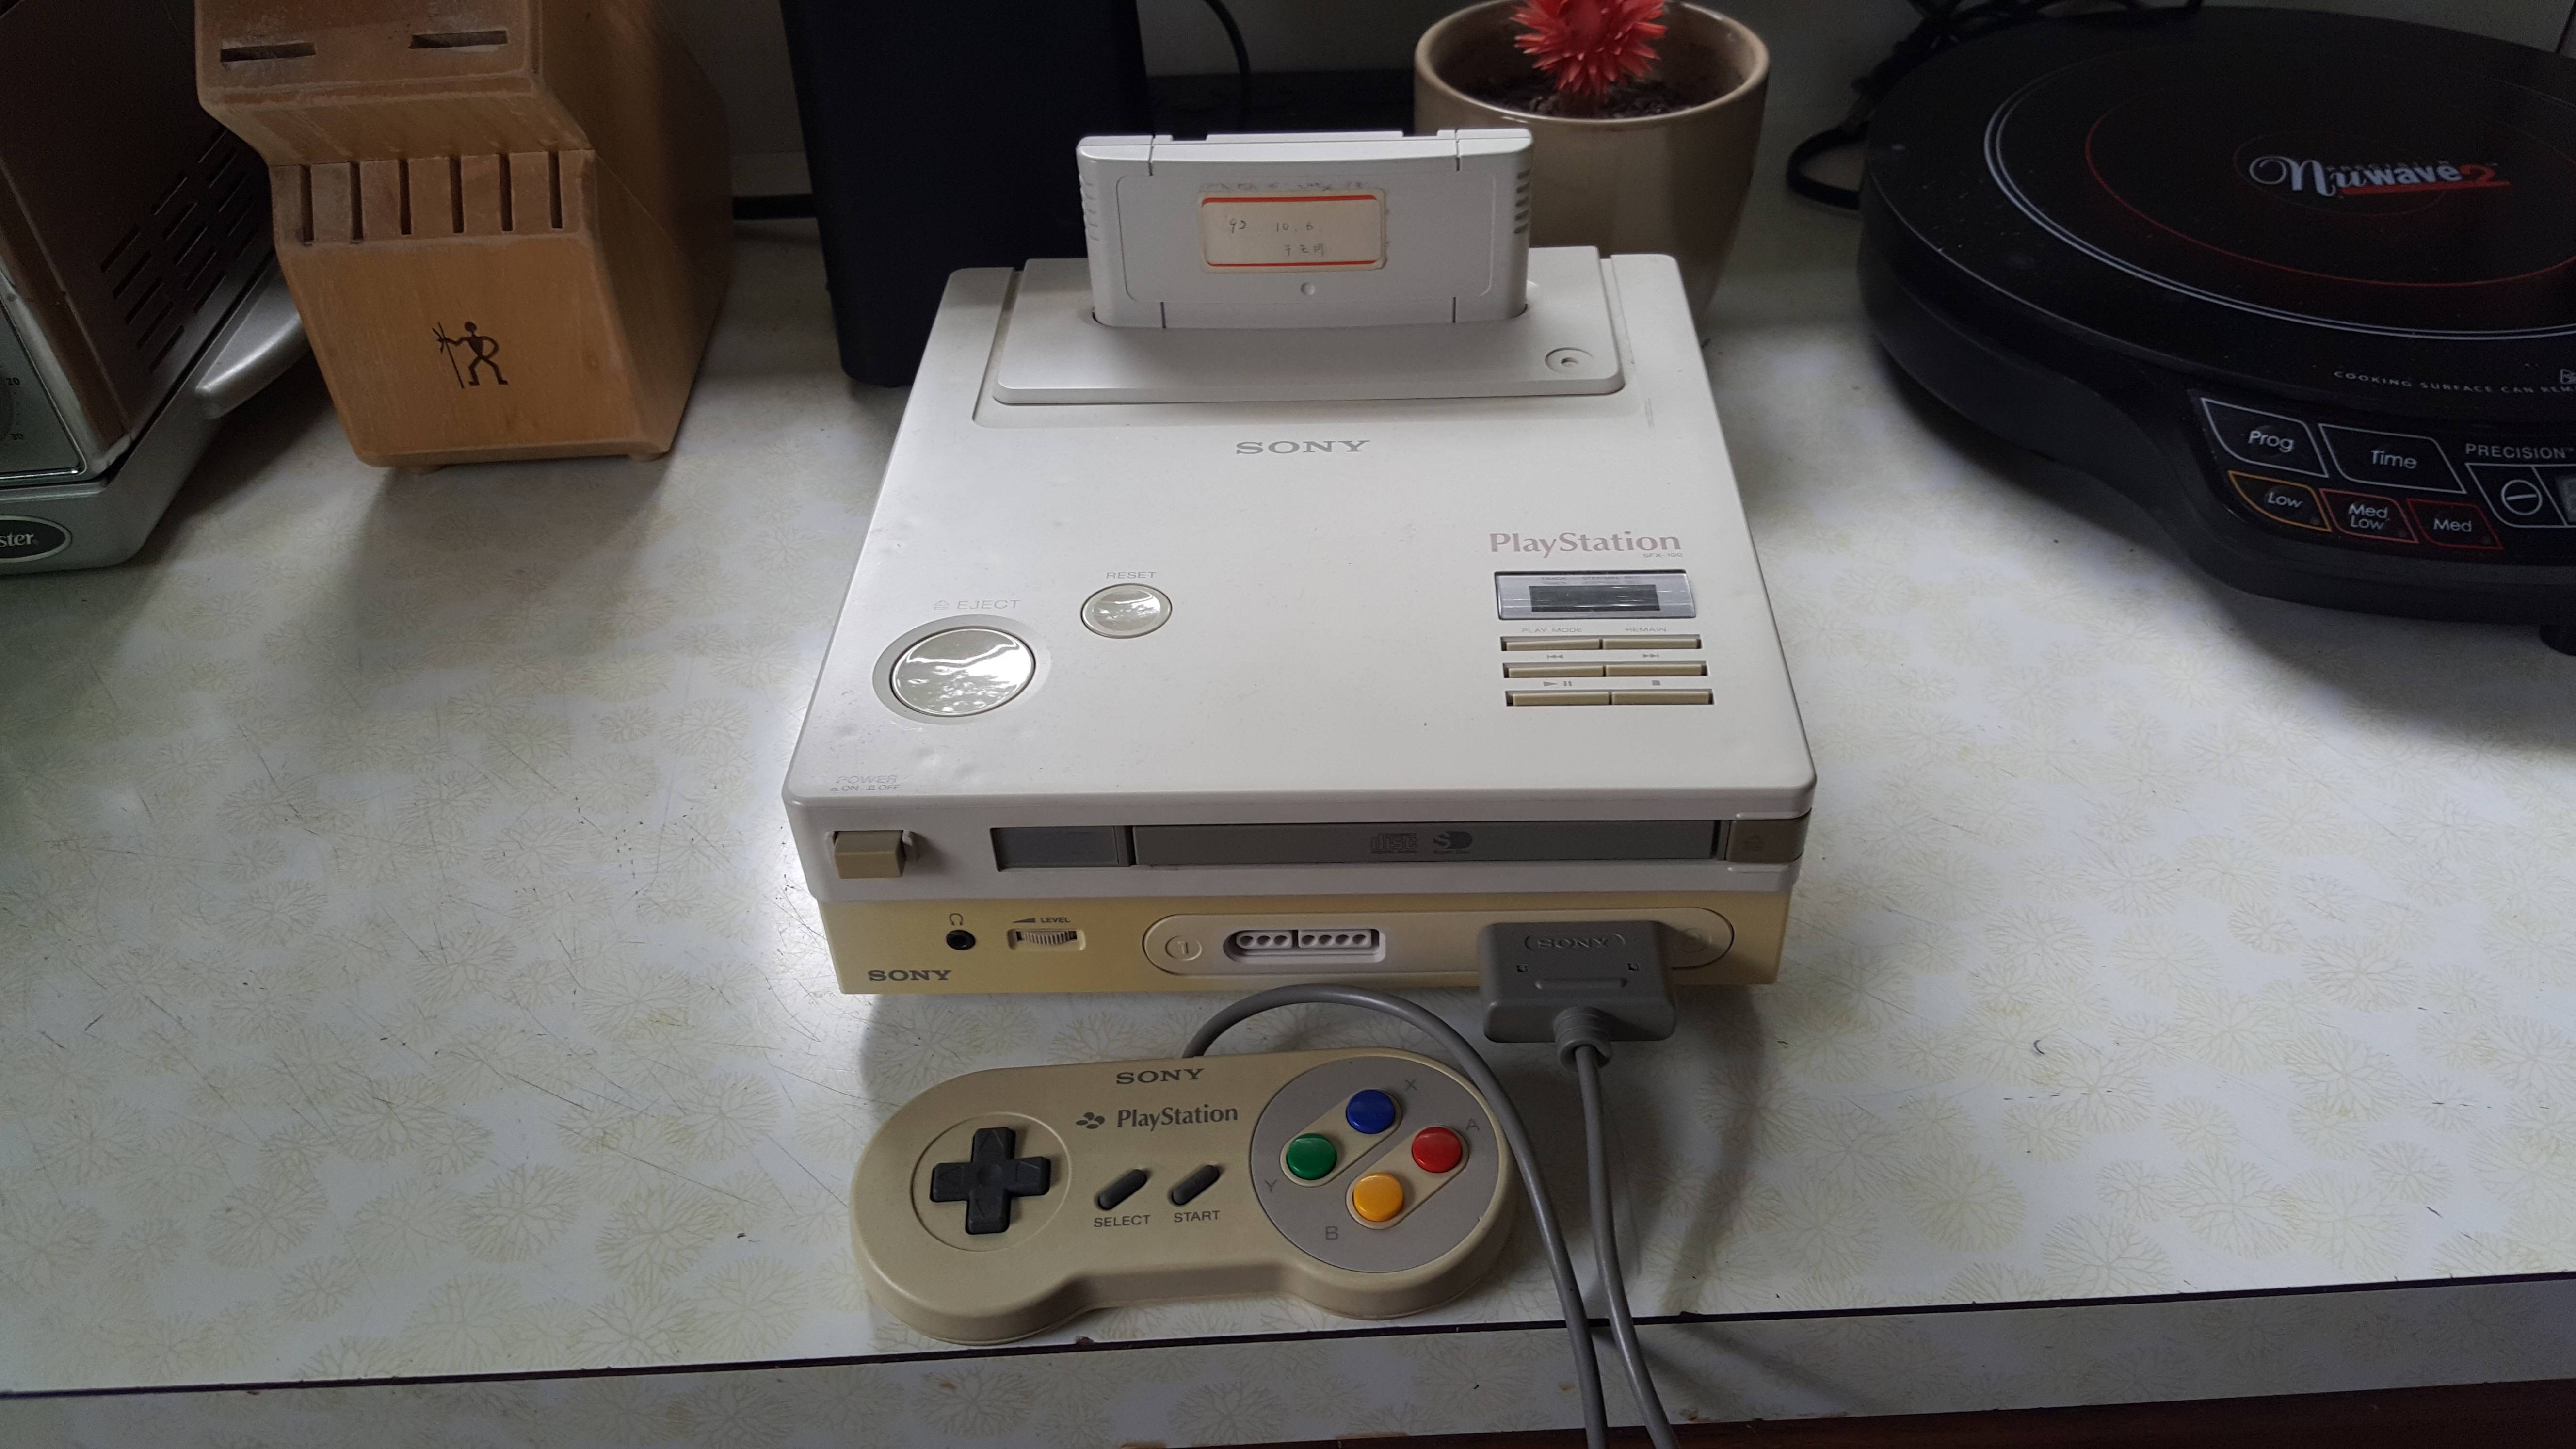 Take a look at the original Sony/Nintendo PlayStation prototype that